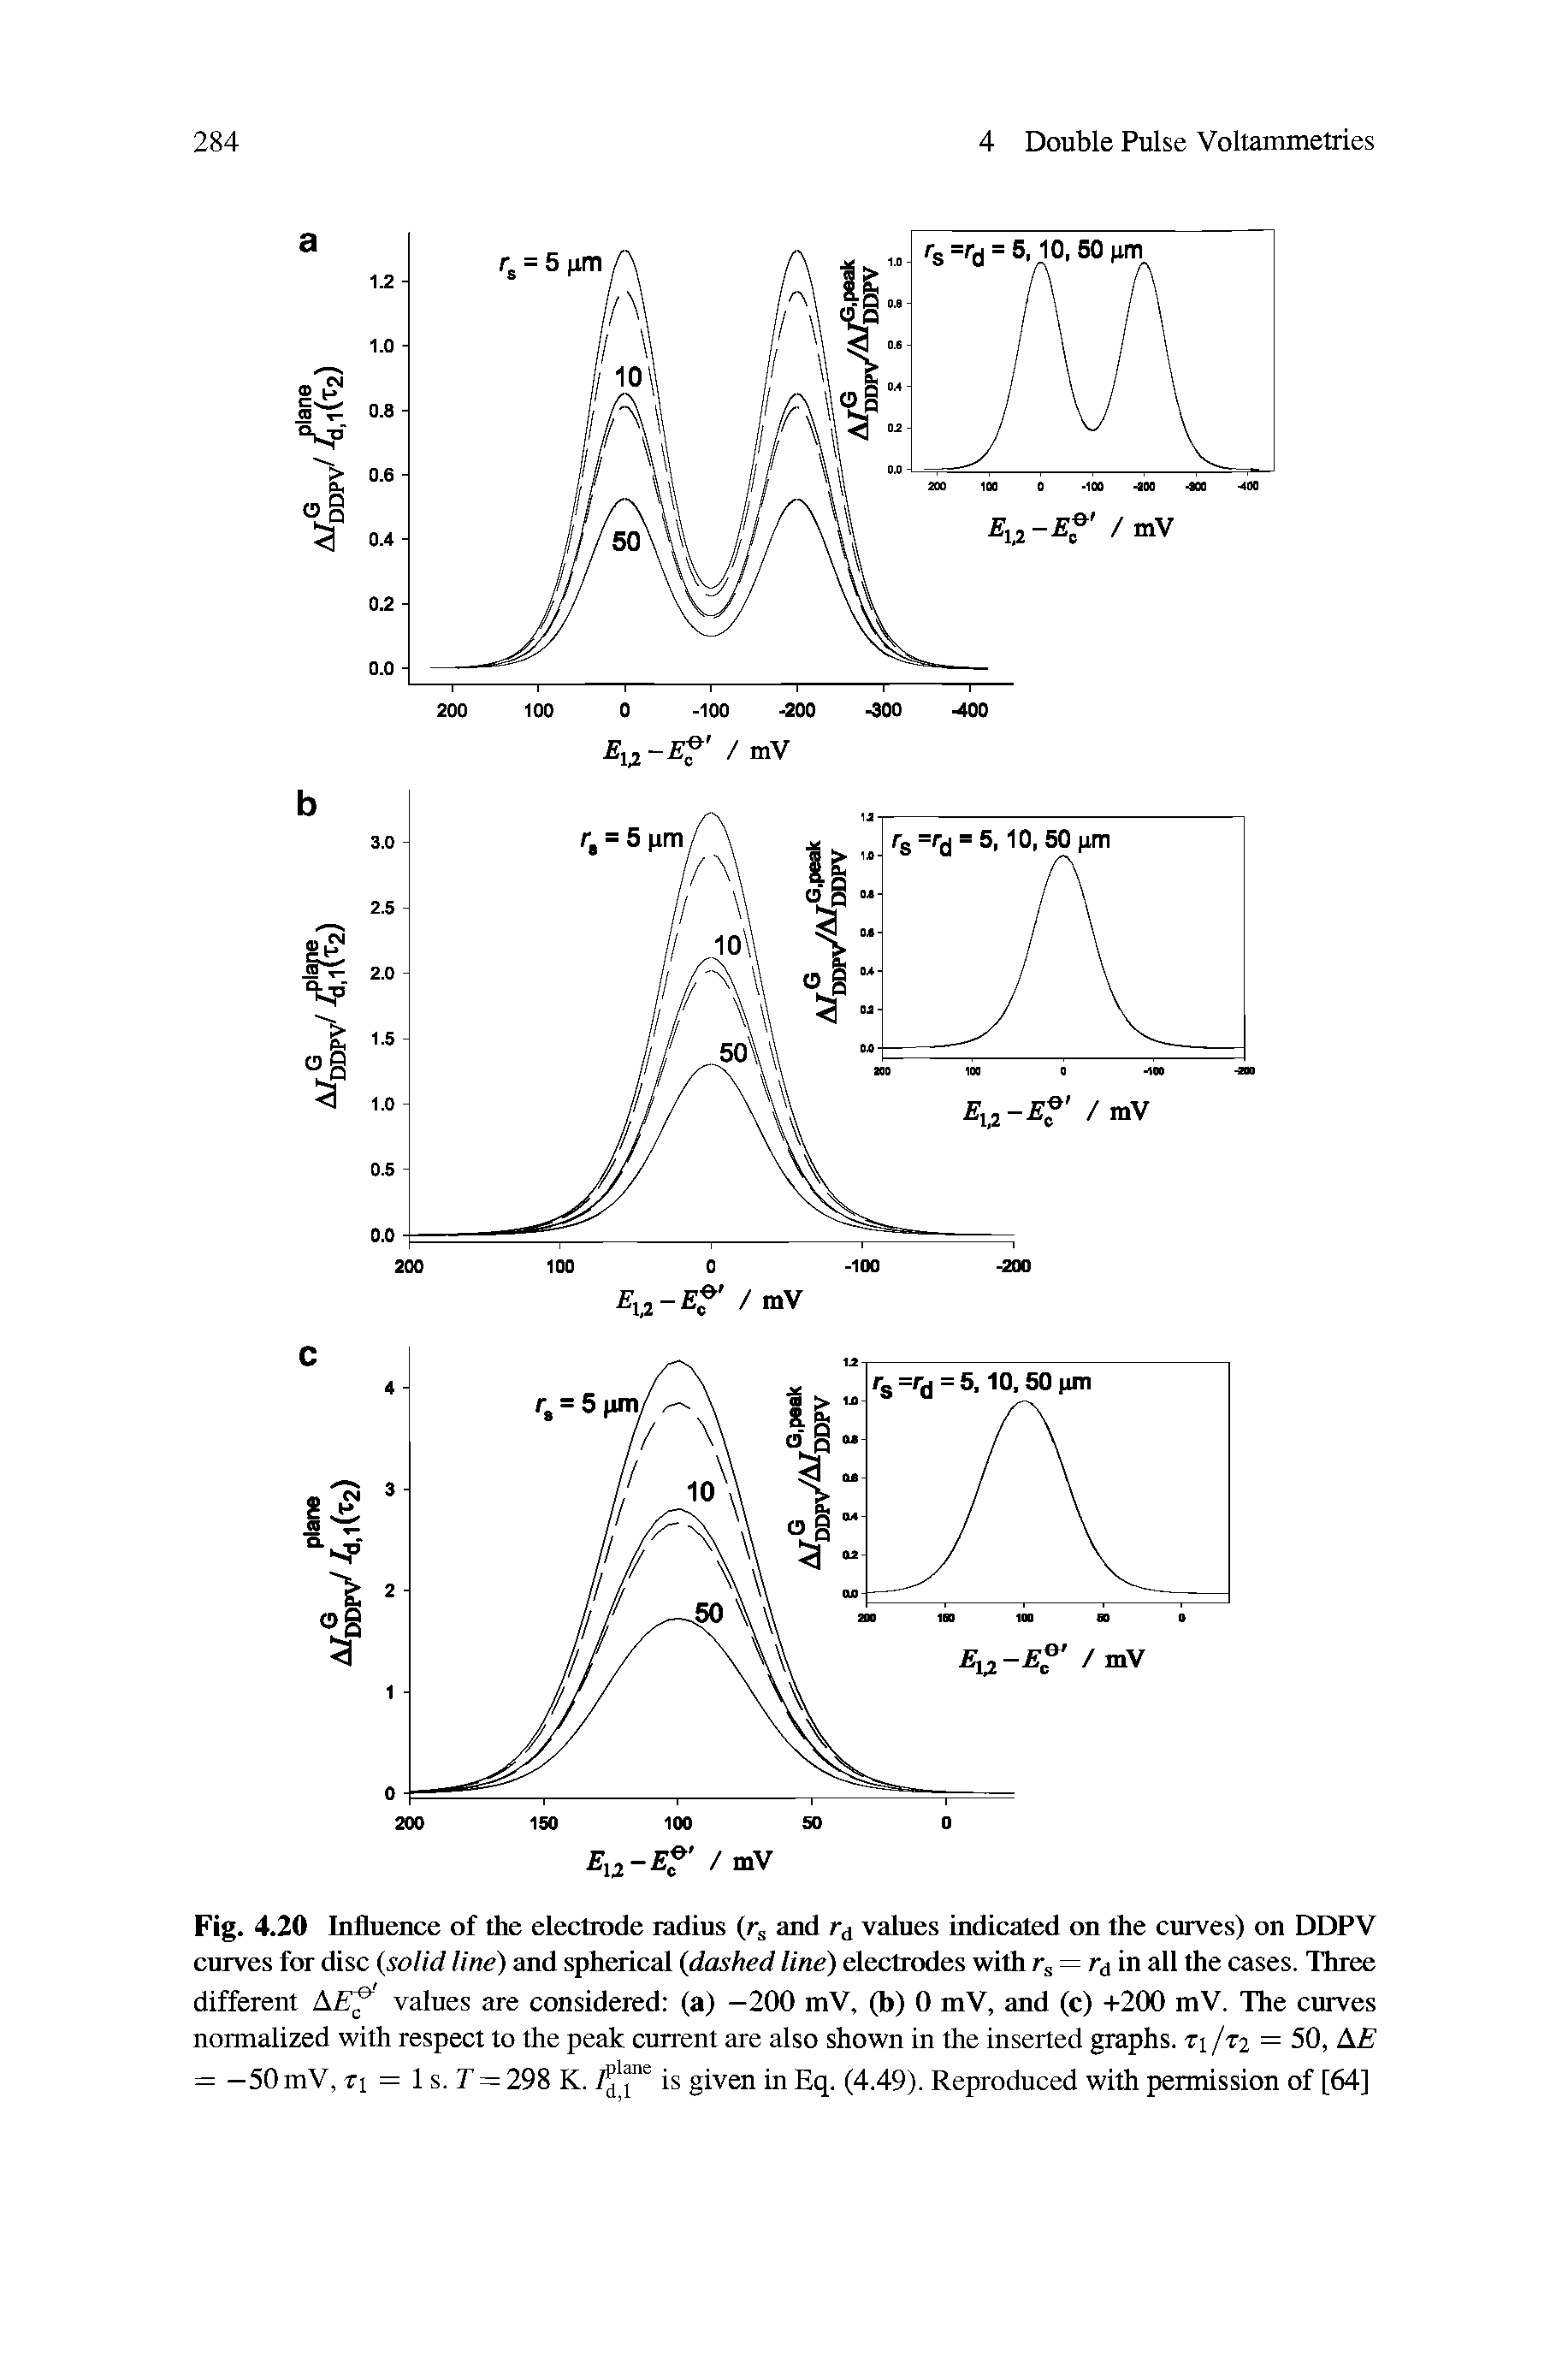 Fig. 4.20 Influence of the electrode radius (rs and rA values indicated on the curves) on DDPV curves for disc (solid line) and spherical (dashed line) electrodes with rs = rd in all the cases. Three different AE values are considered (a) —200 mV, (b) 0 mV, and (c) +200 mV. The curves normalized with respect to the peak current are also shown in the inserted graphs. T1/T2 = 50, AE = —50mV, ti = 1 s. T = 298 K. is given in Eq. (4.49). Reproduced with permission of [64]...